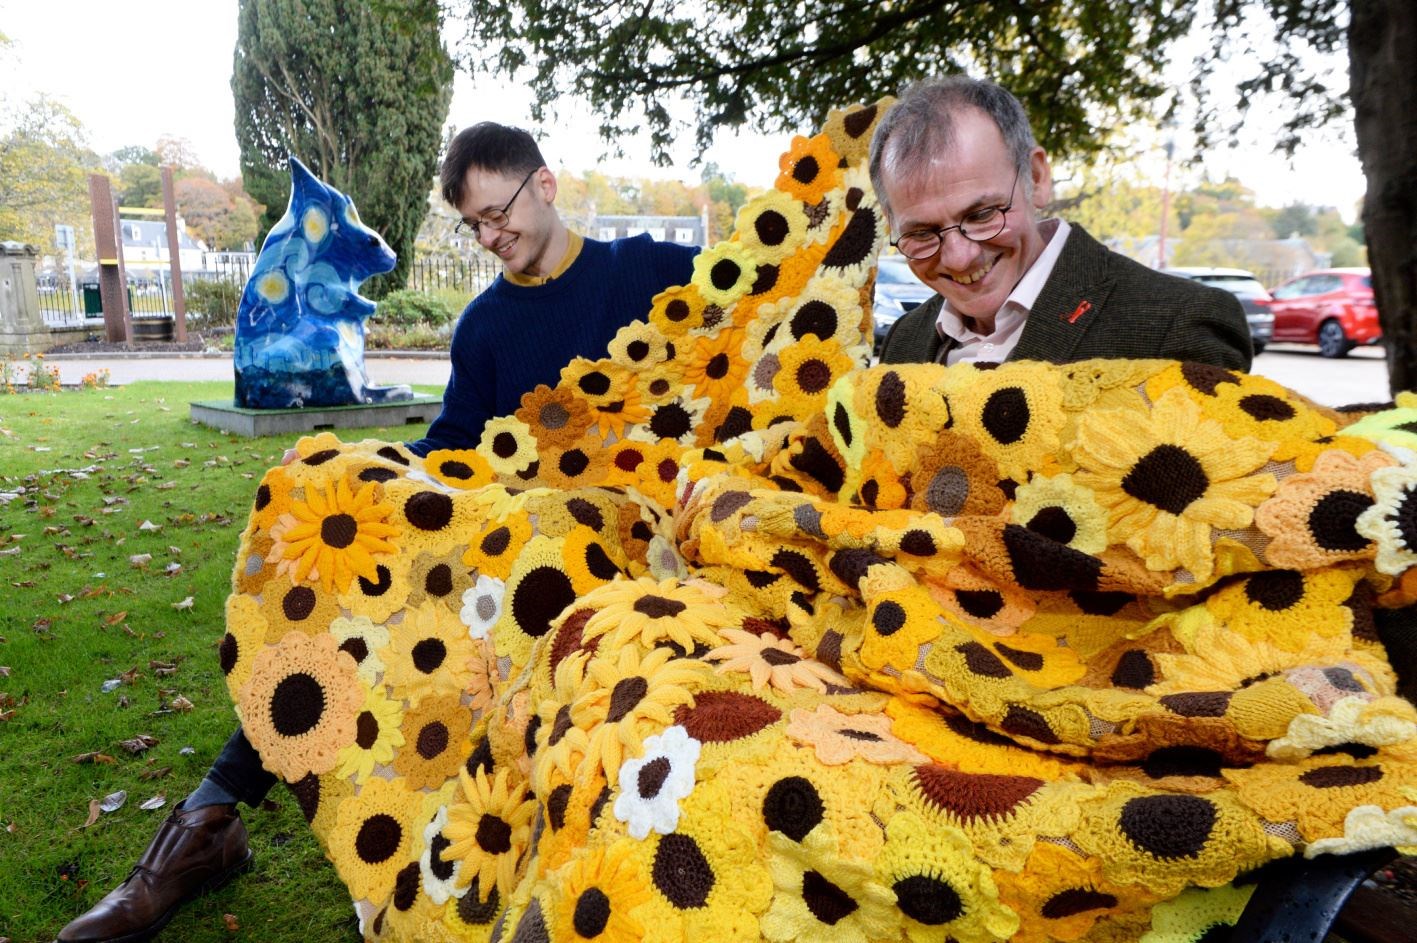 Joe Setch, Inverness Museum assistant receives one of the sunflower cascades from Andrew Leaver, Highland Hospice fundraising manager. Picture: James Mackenzie